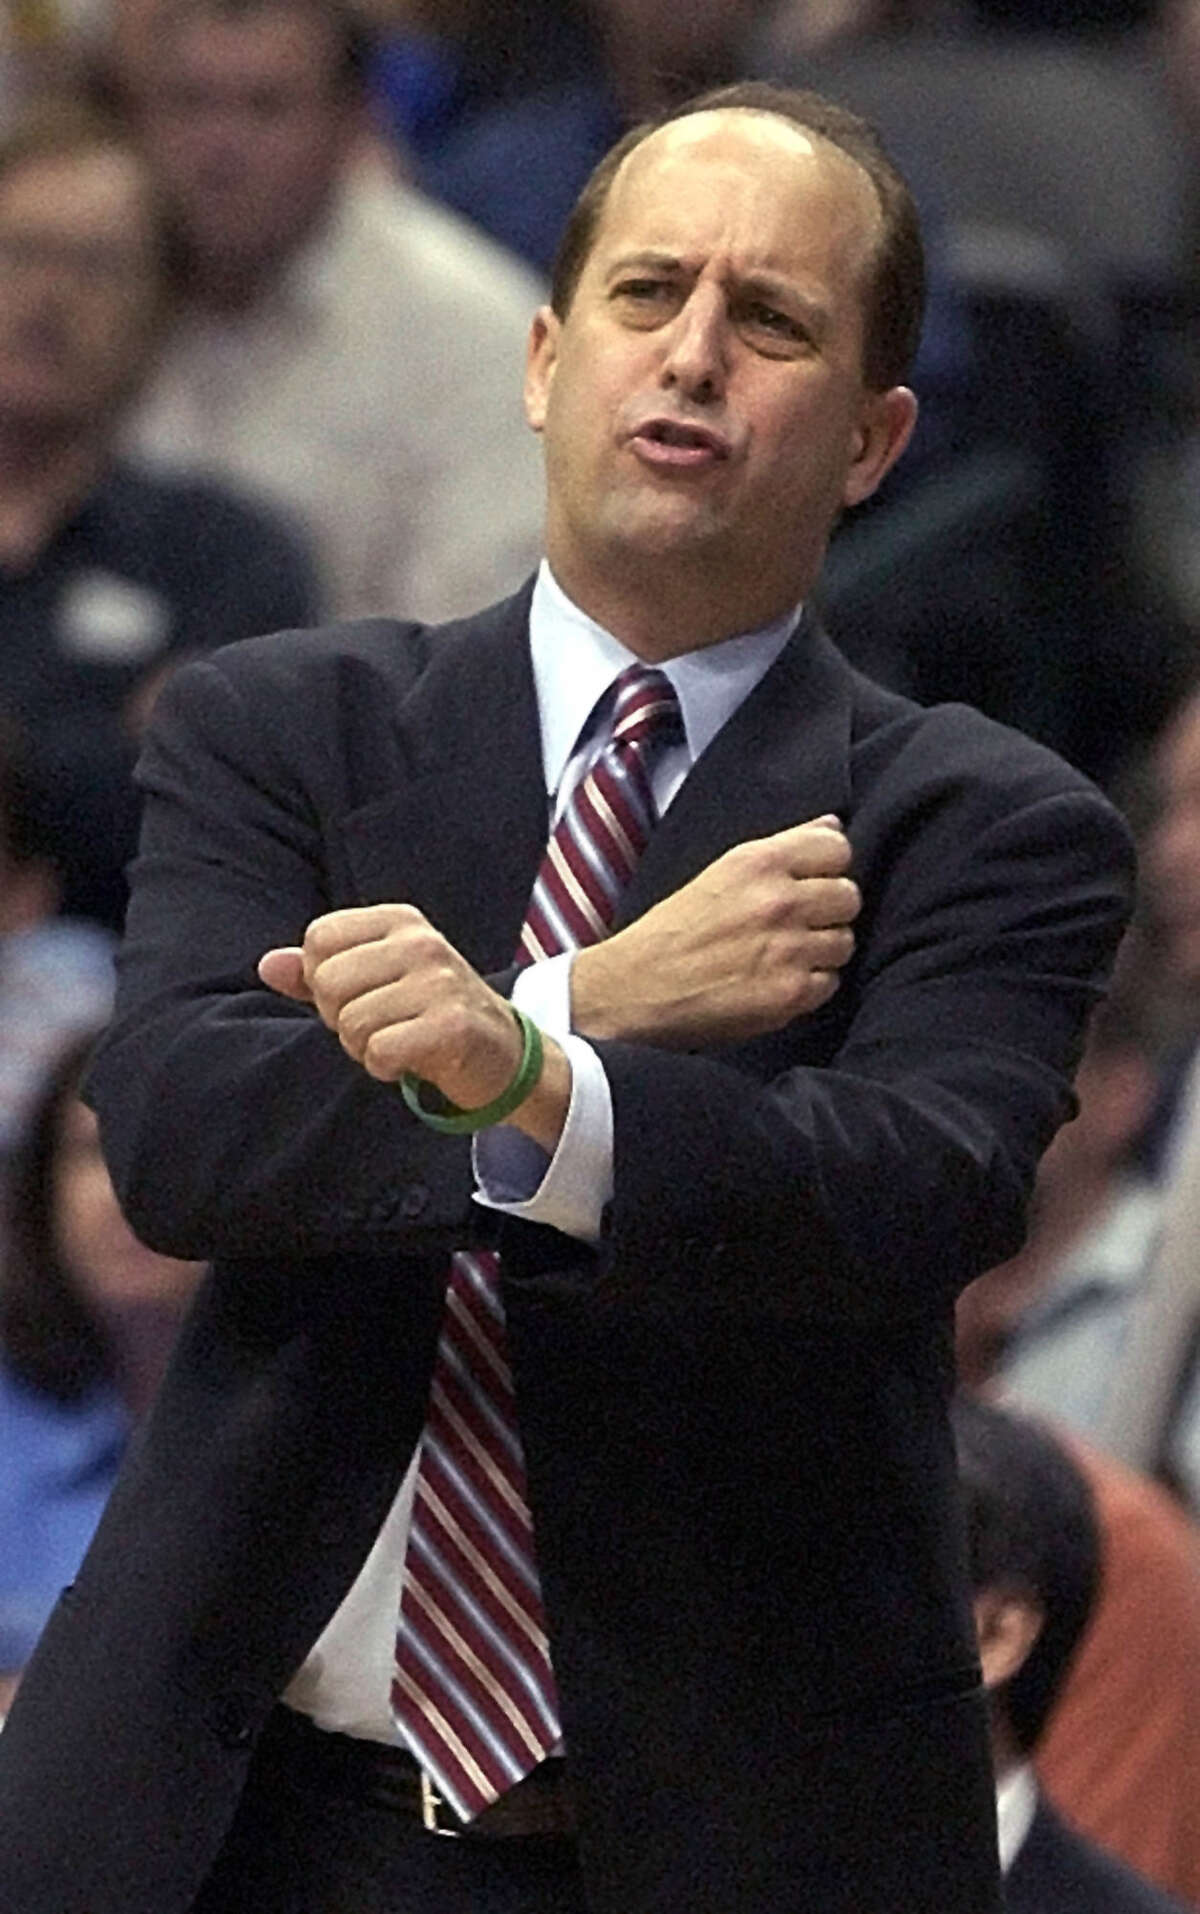 Houston Rockets coach Jeff Van Gundy looks for a foul call during the second quarter against the Dallas Mavericks in Dallas, April 23, 2005. The Rockets won 98-86. (AP Photo/LM Otero)